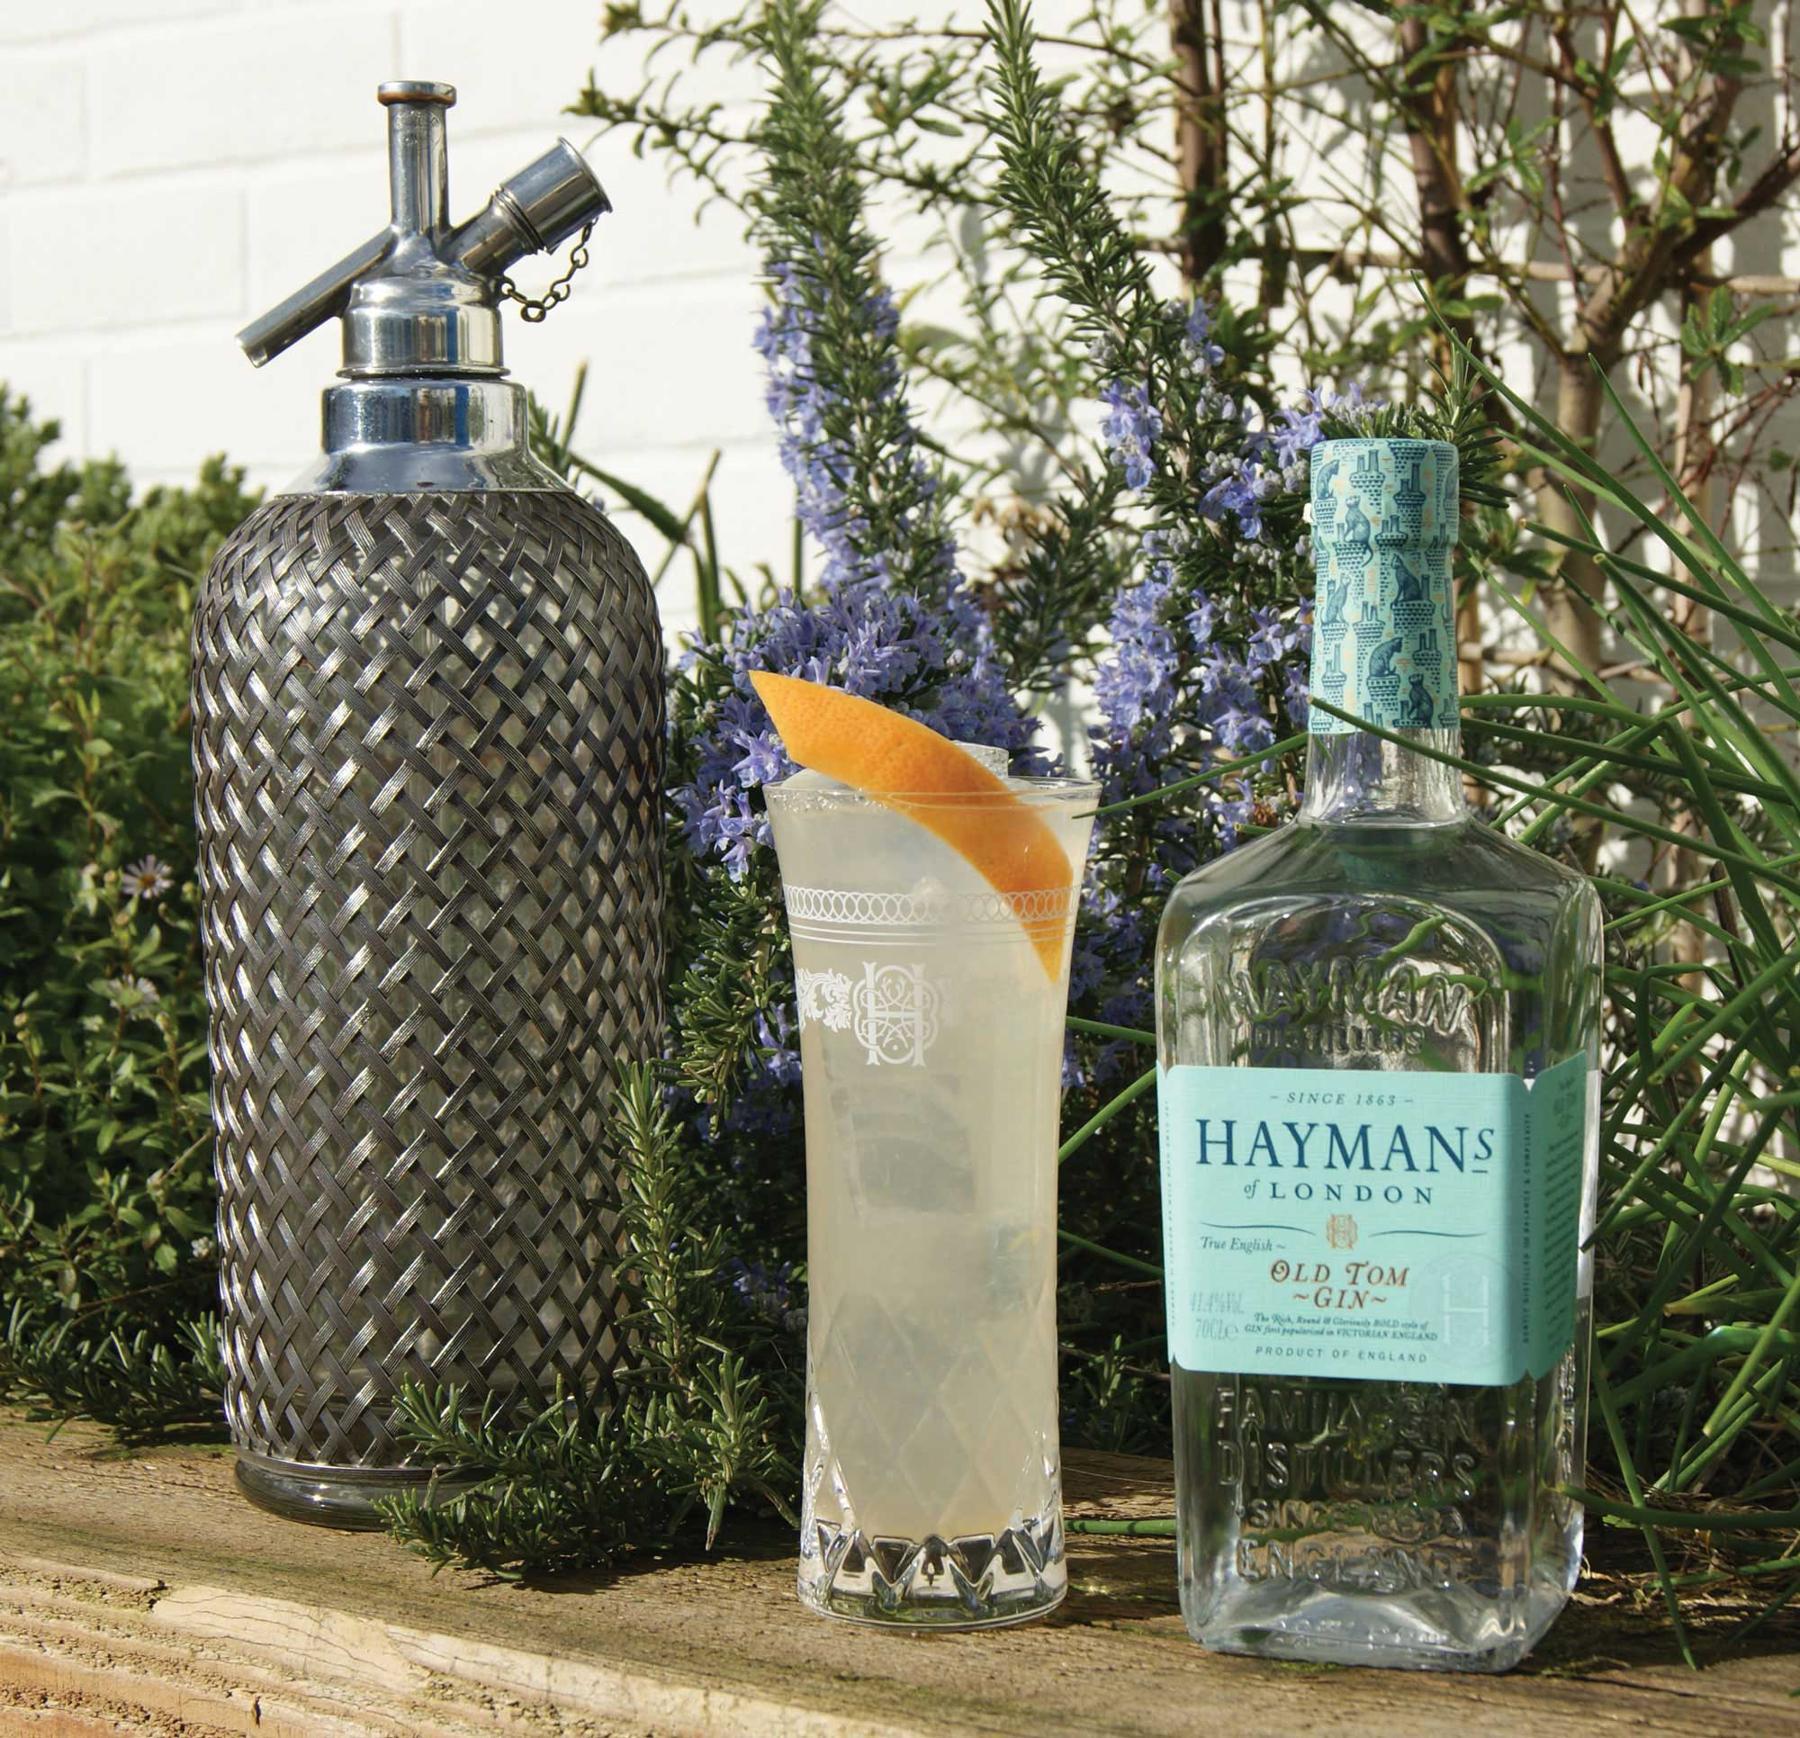 An example of the Grapefruit Spritz, the mixed drink (drink) featuring soda water, Hayman’s Old Tom Gin, grapefruit juice, soda water, and grapefruit twist; photo by Hayman’s of London